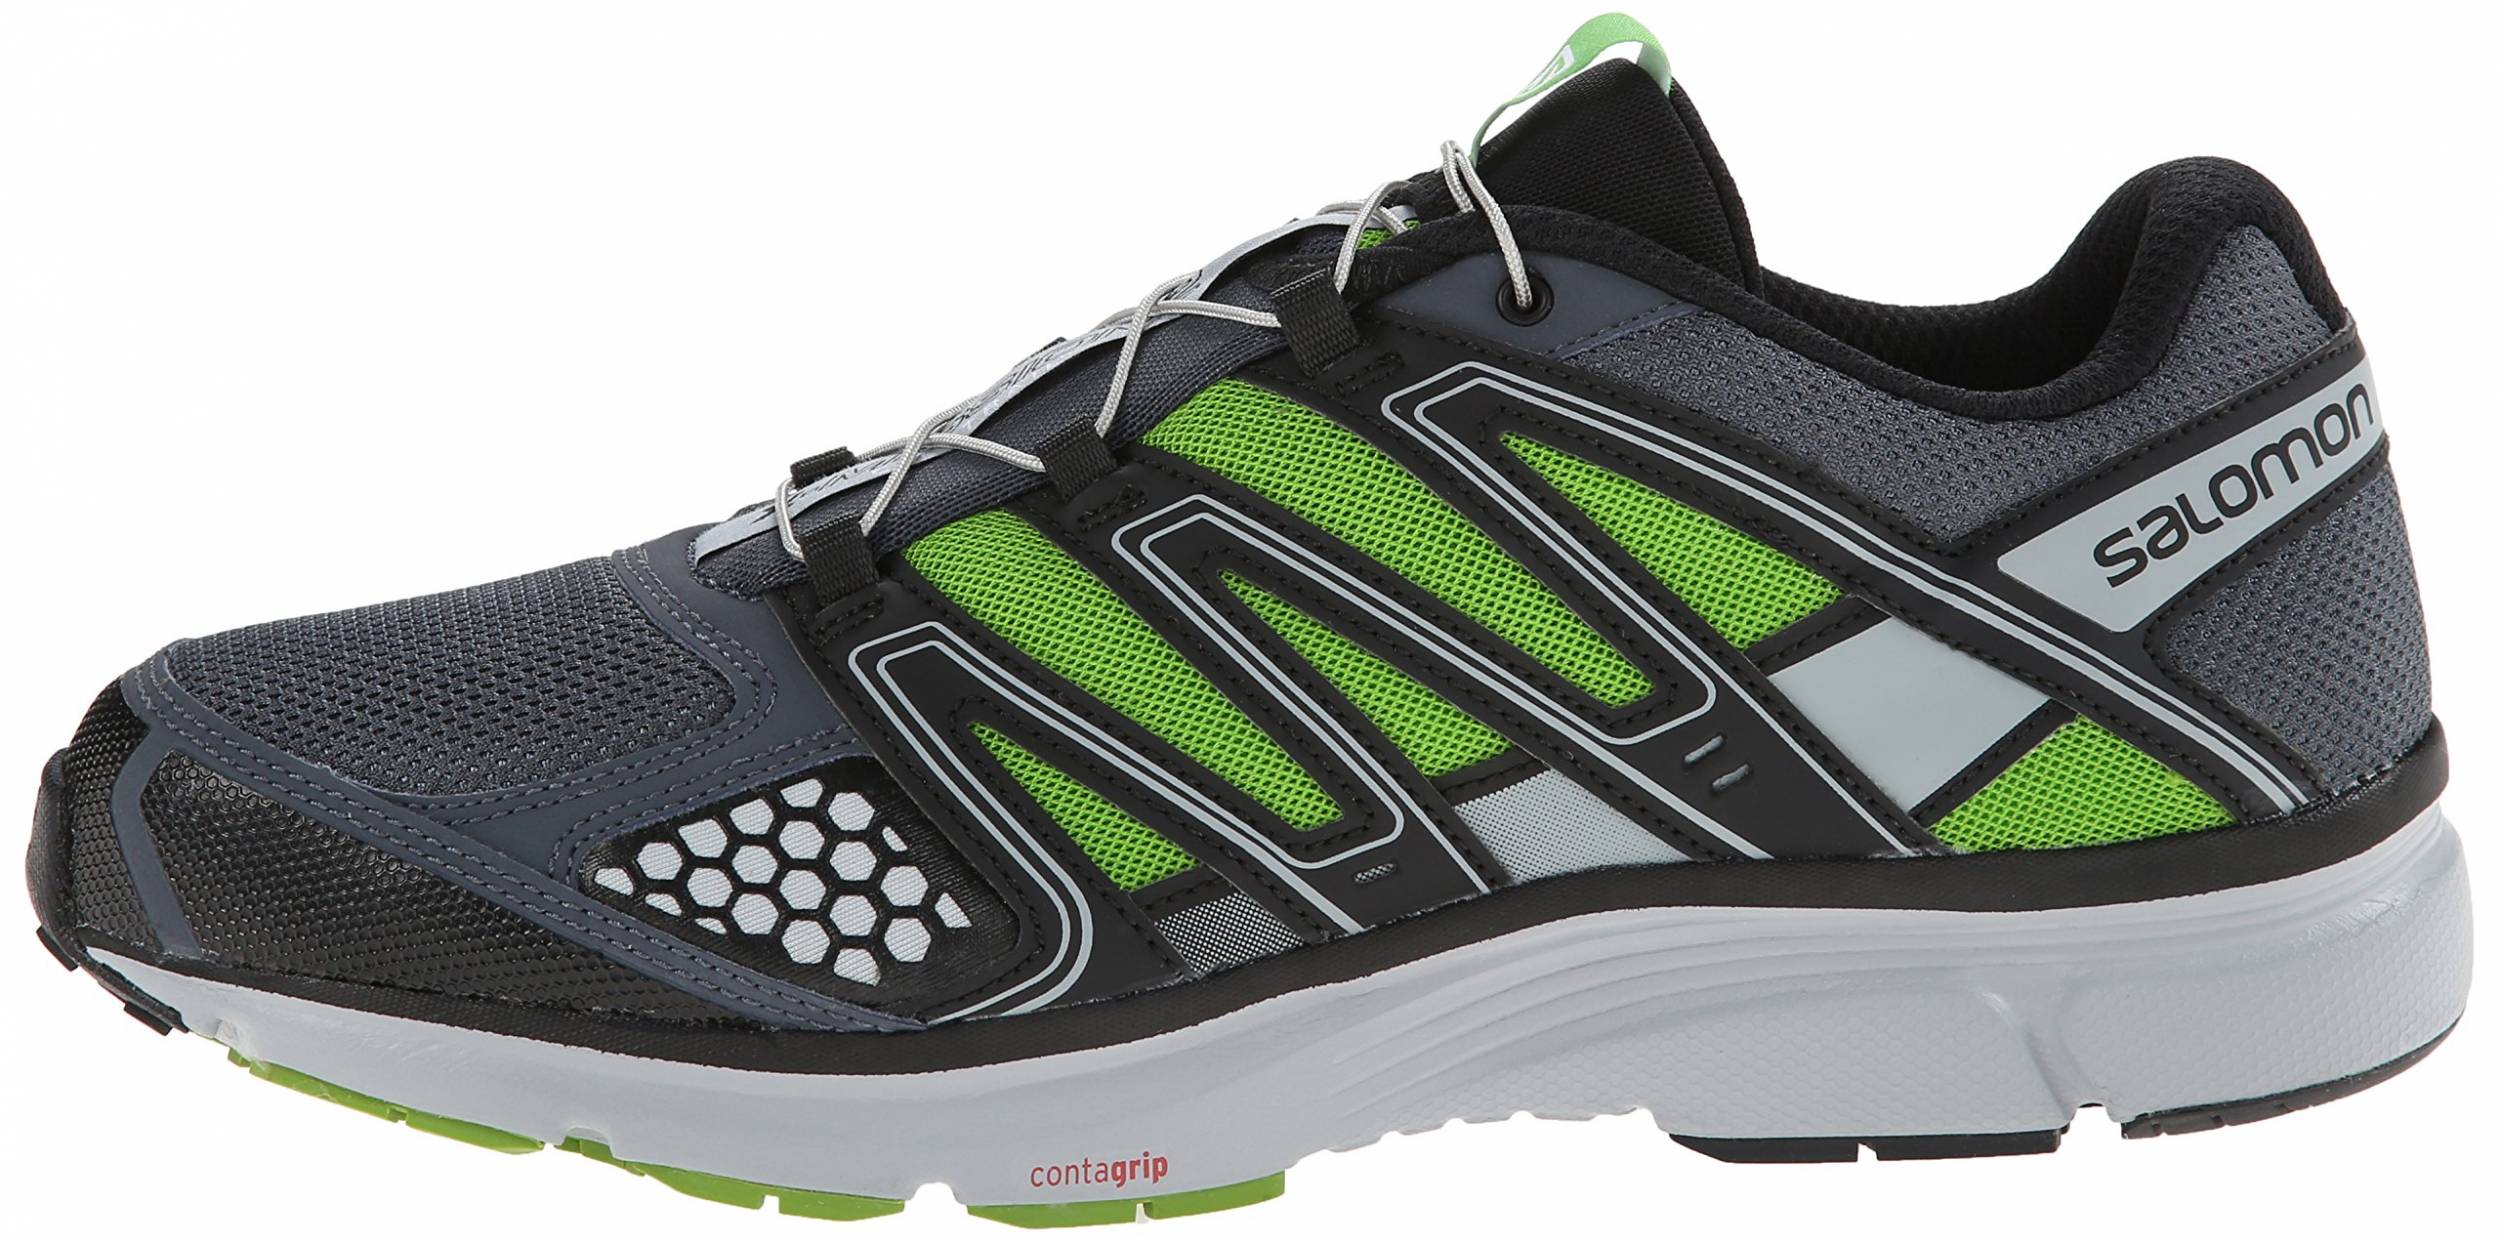 Only £69 + Review of Salomon X Mission 2 | RunRepeat